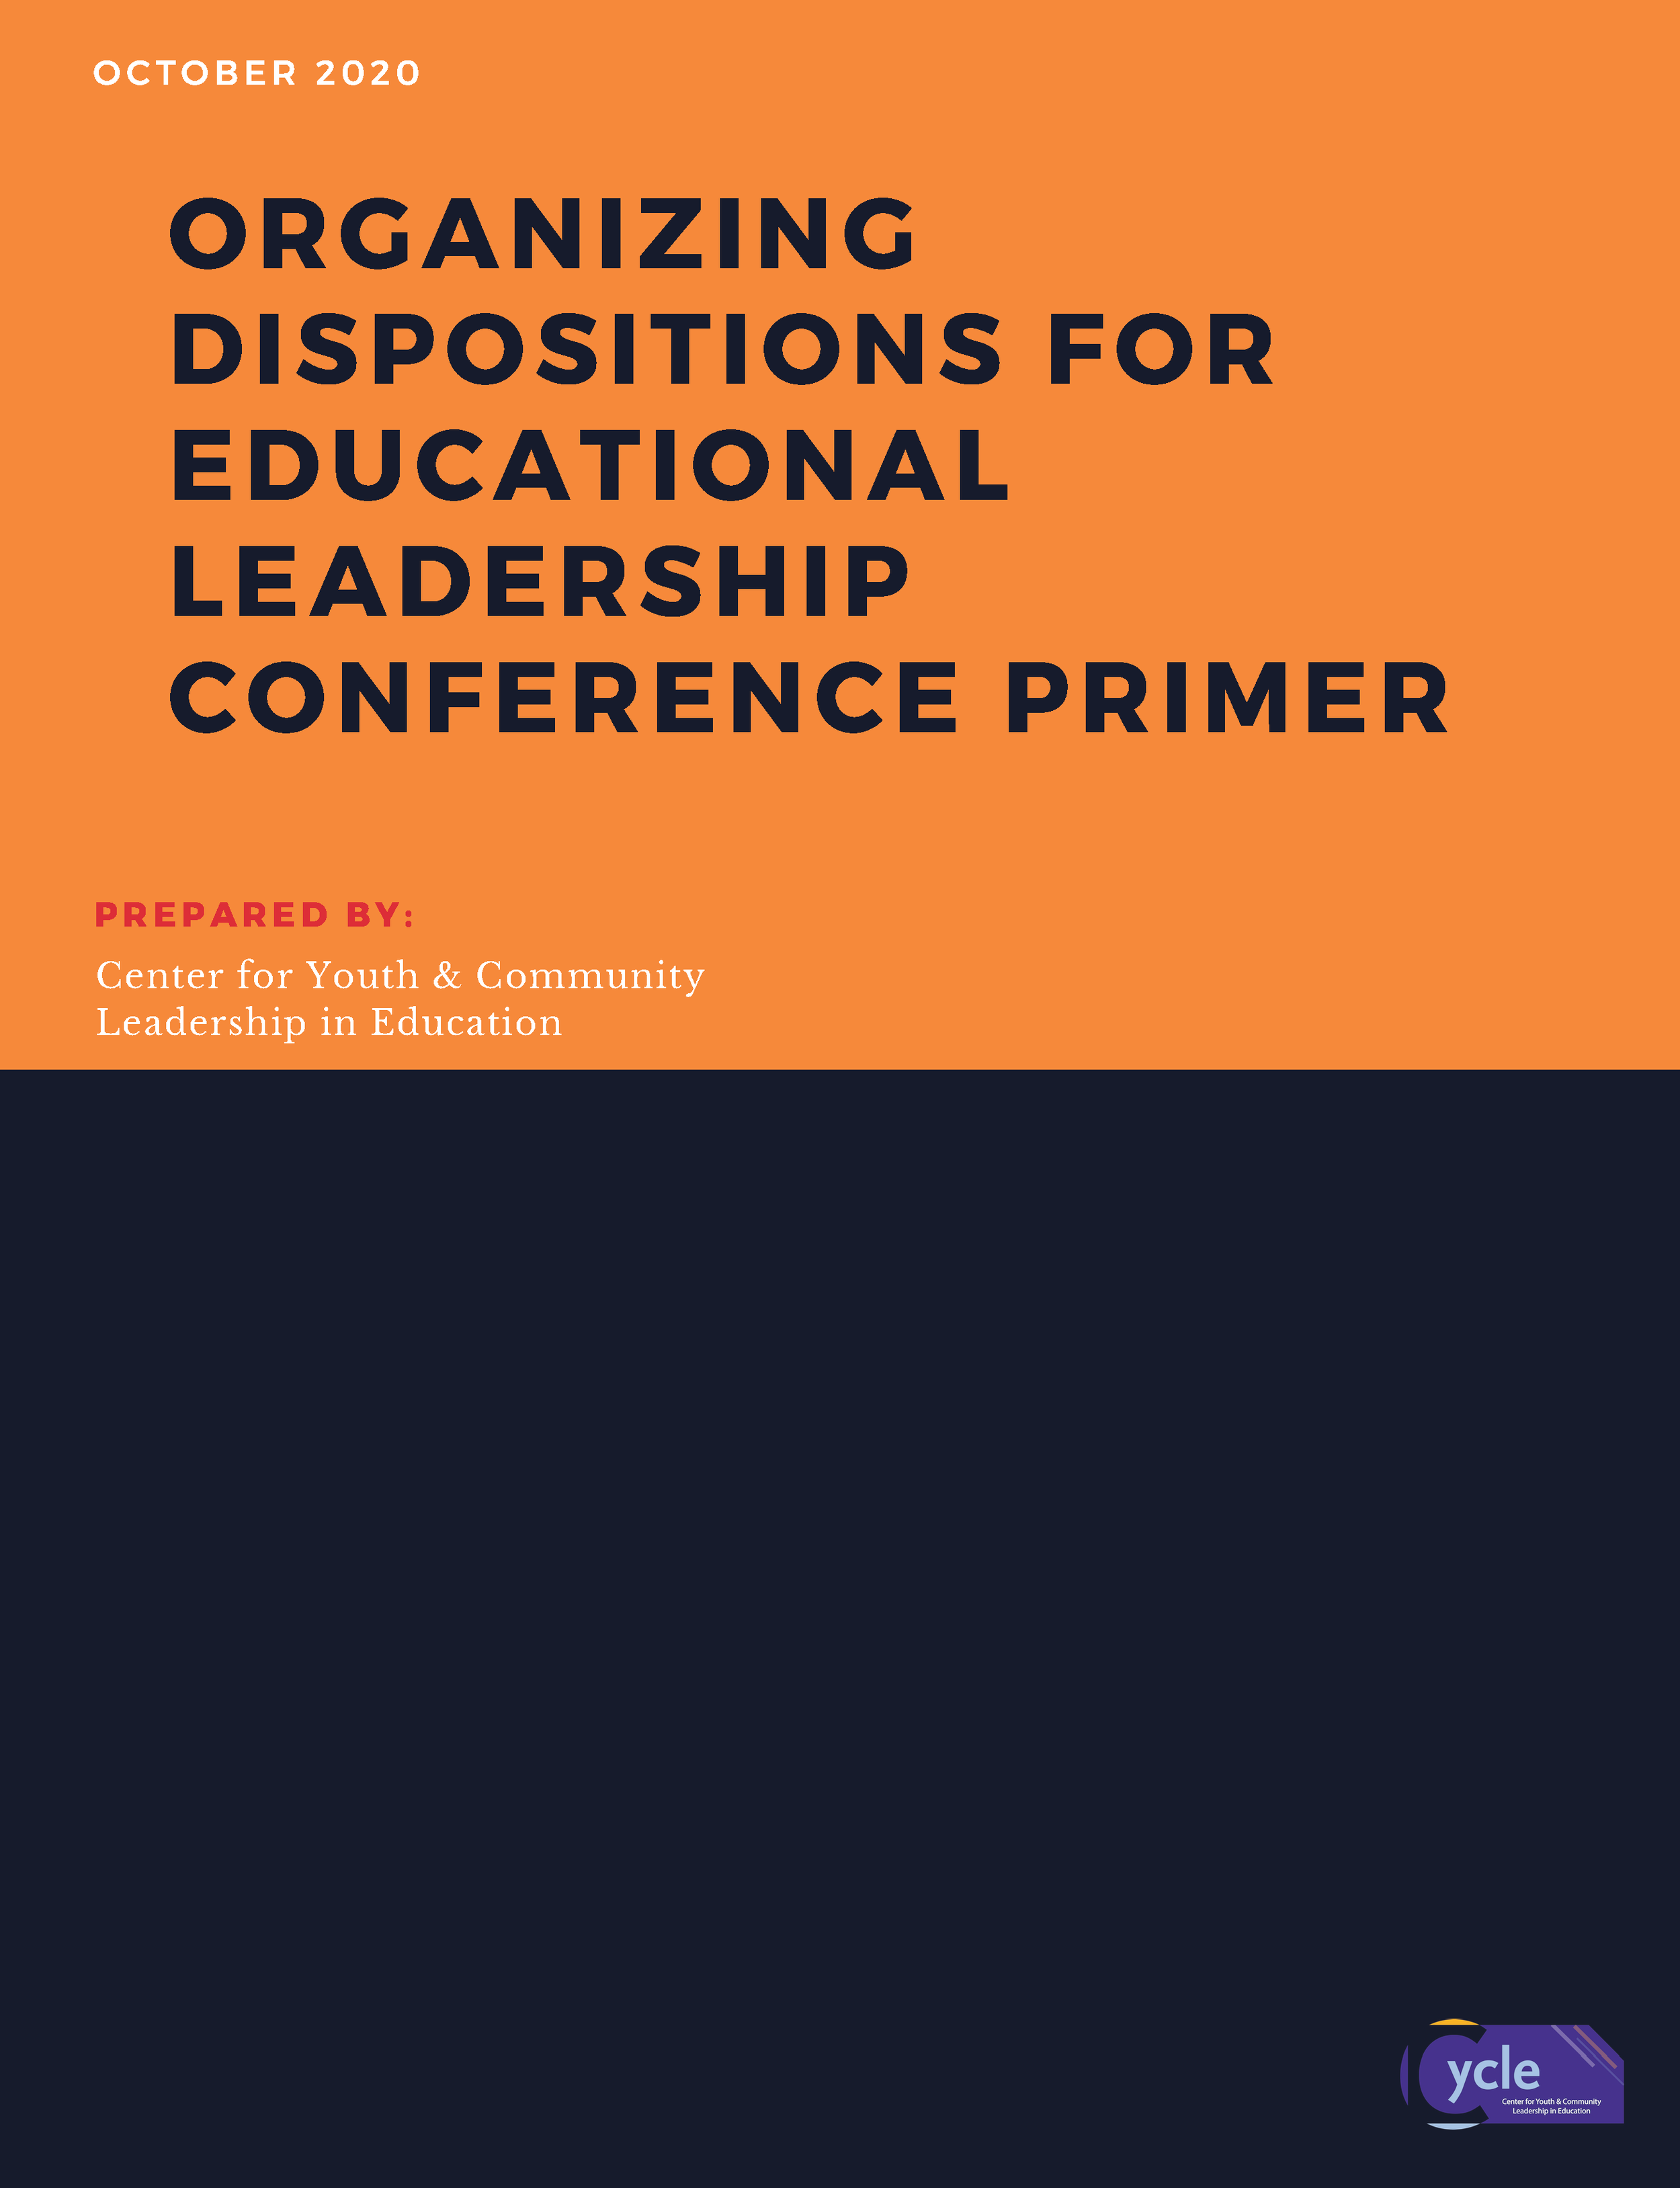 Organizing Dispositions for Educational Leadership Conference Primer